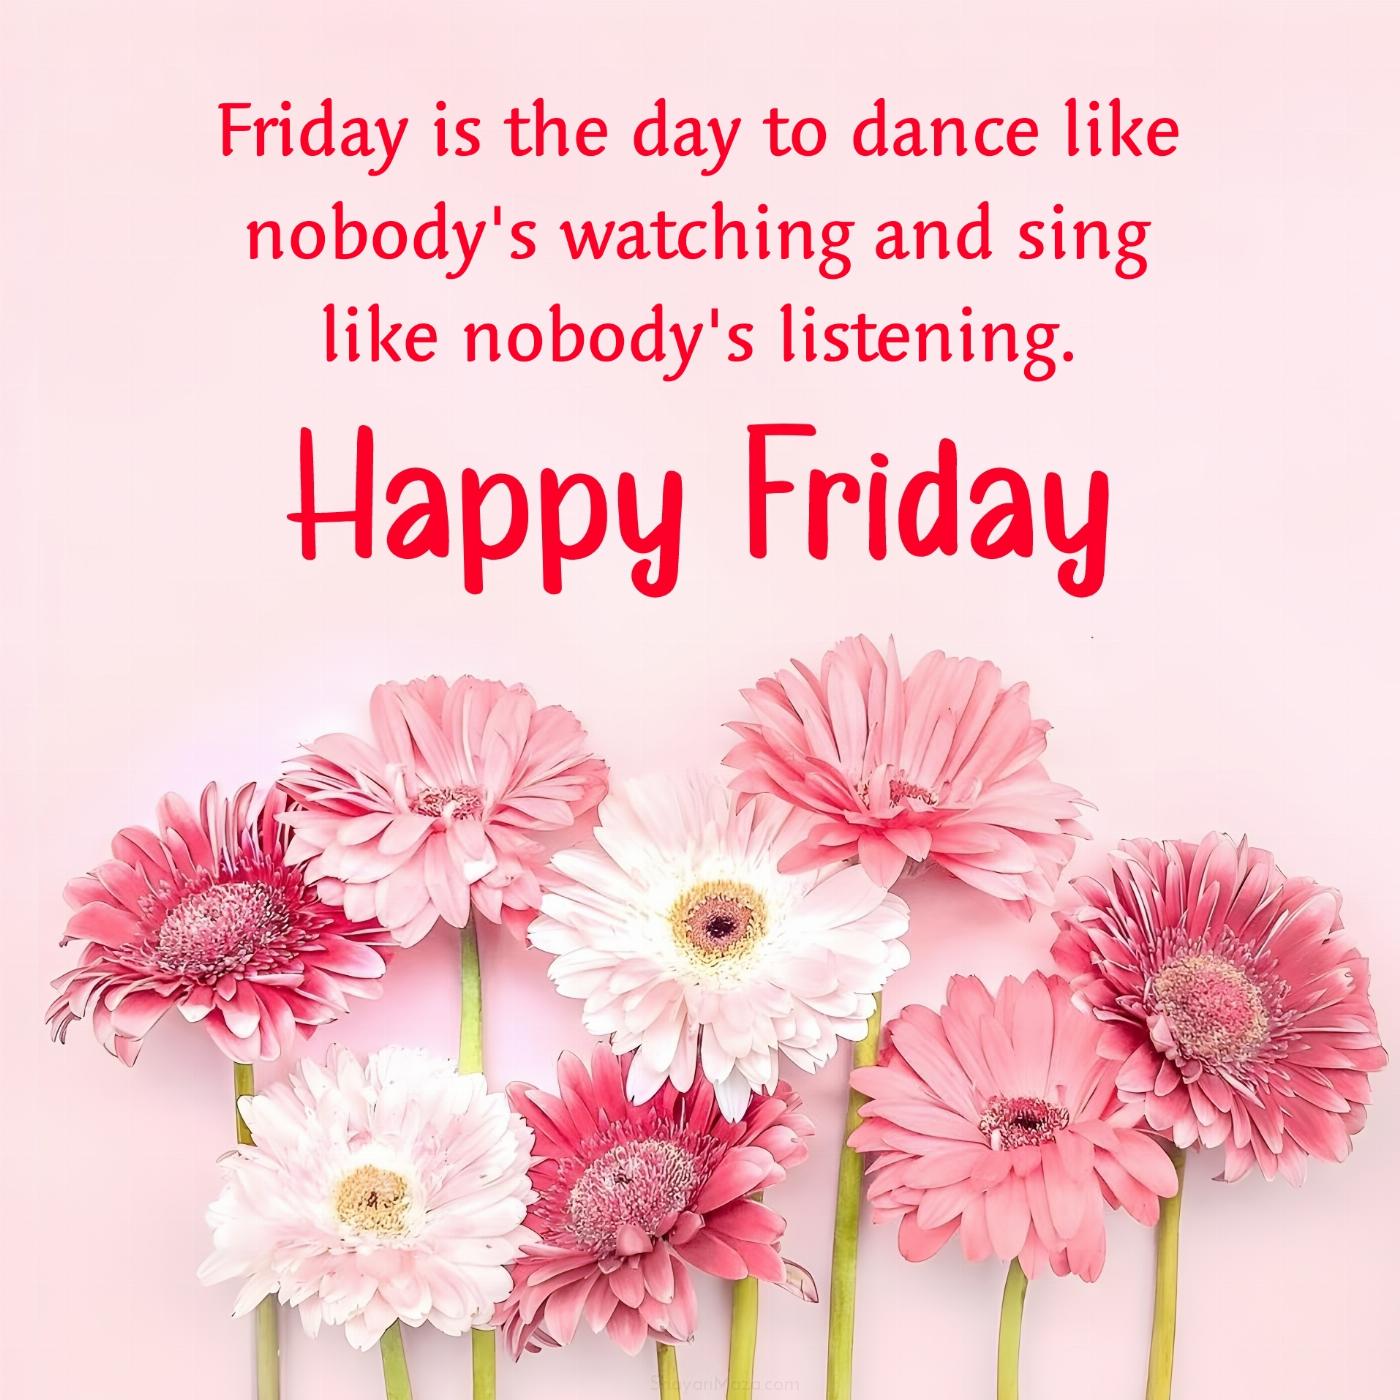 Friday is the day to dance like nobody's watching